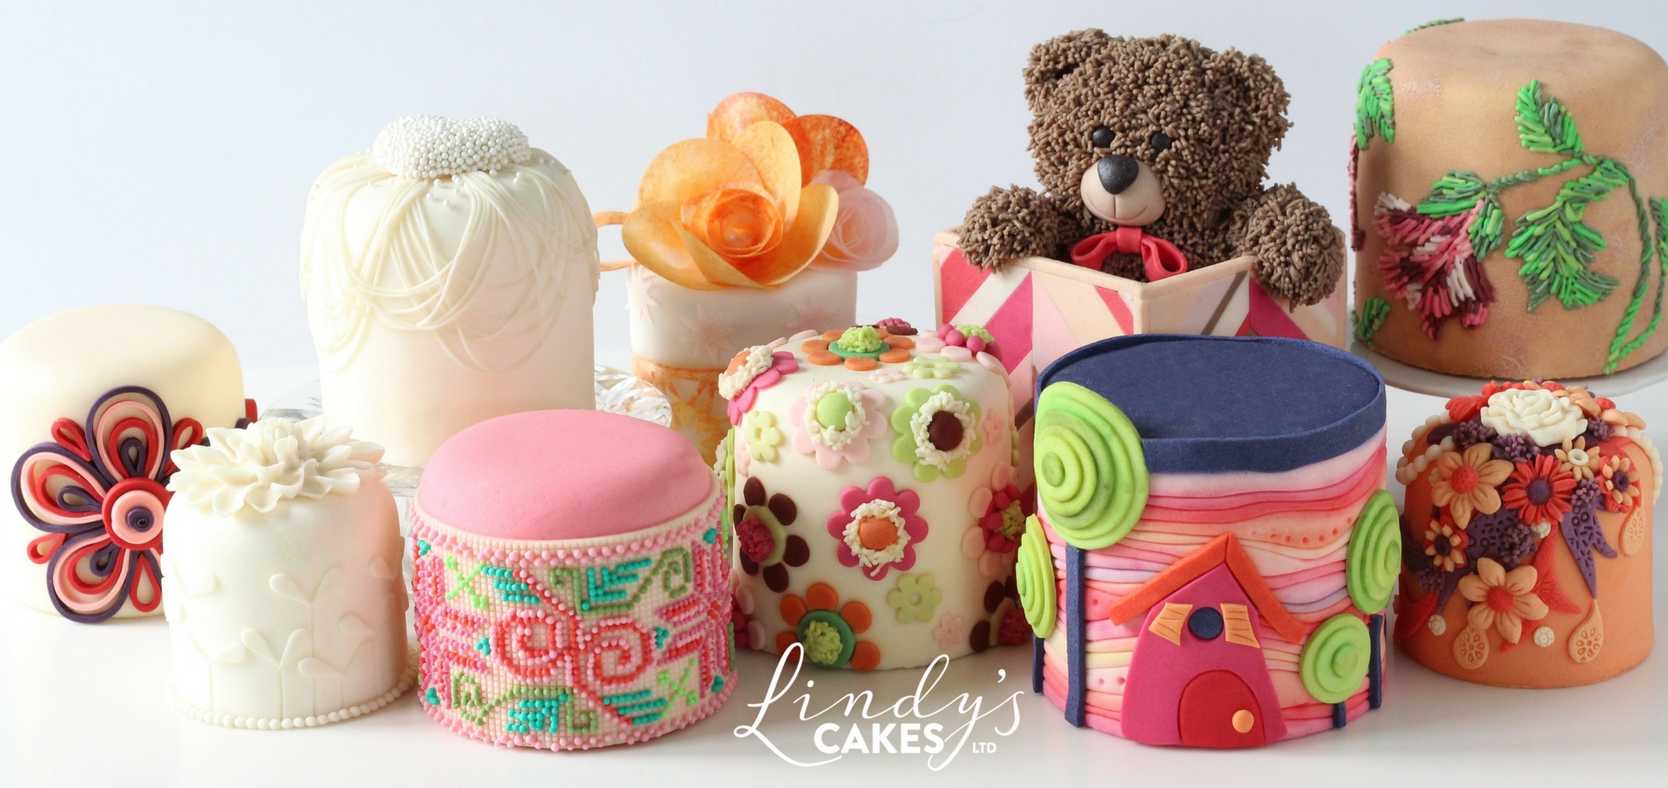 be inspired by mini cakes - examples in Lindy's gallery